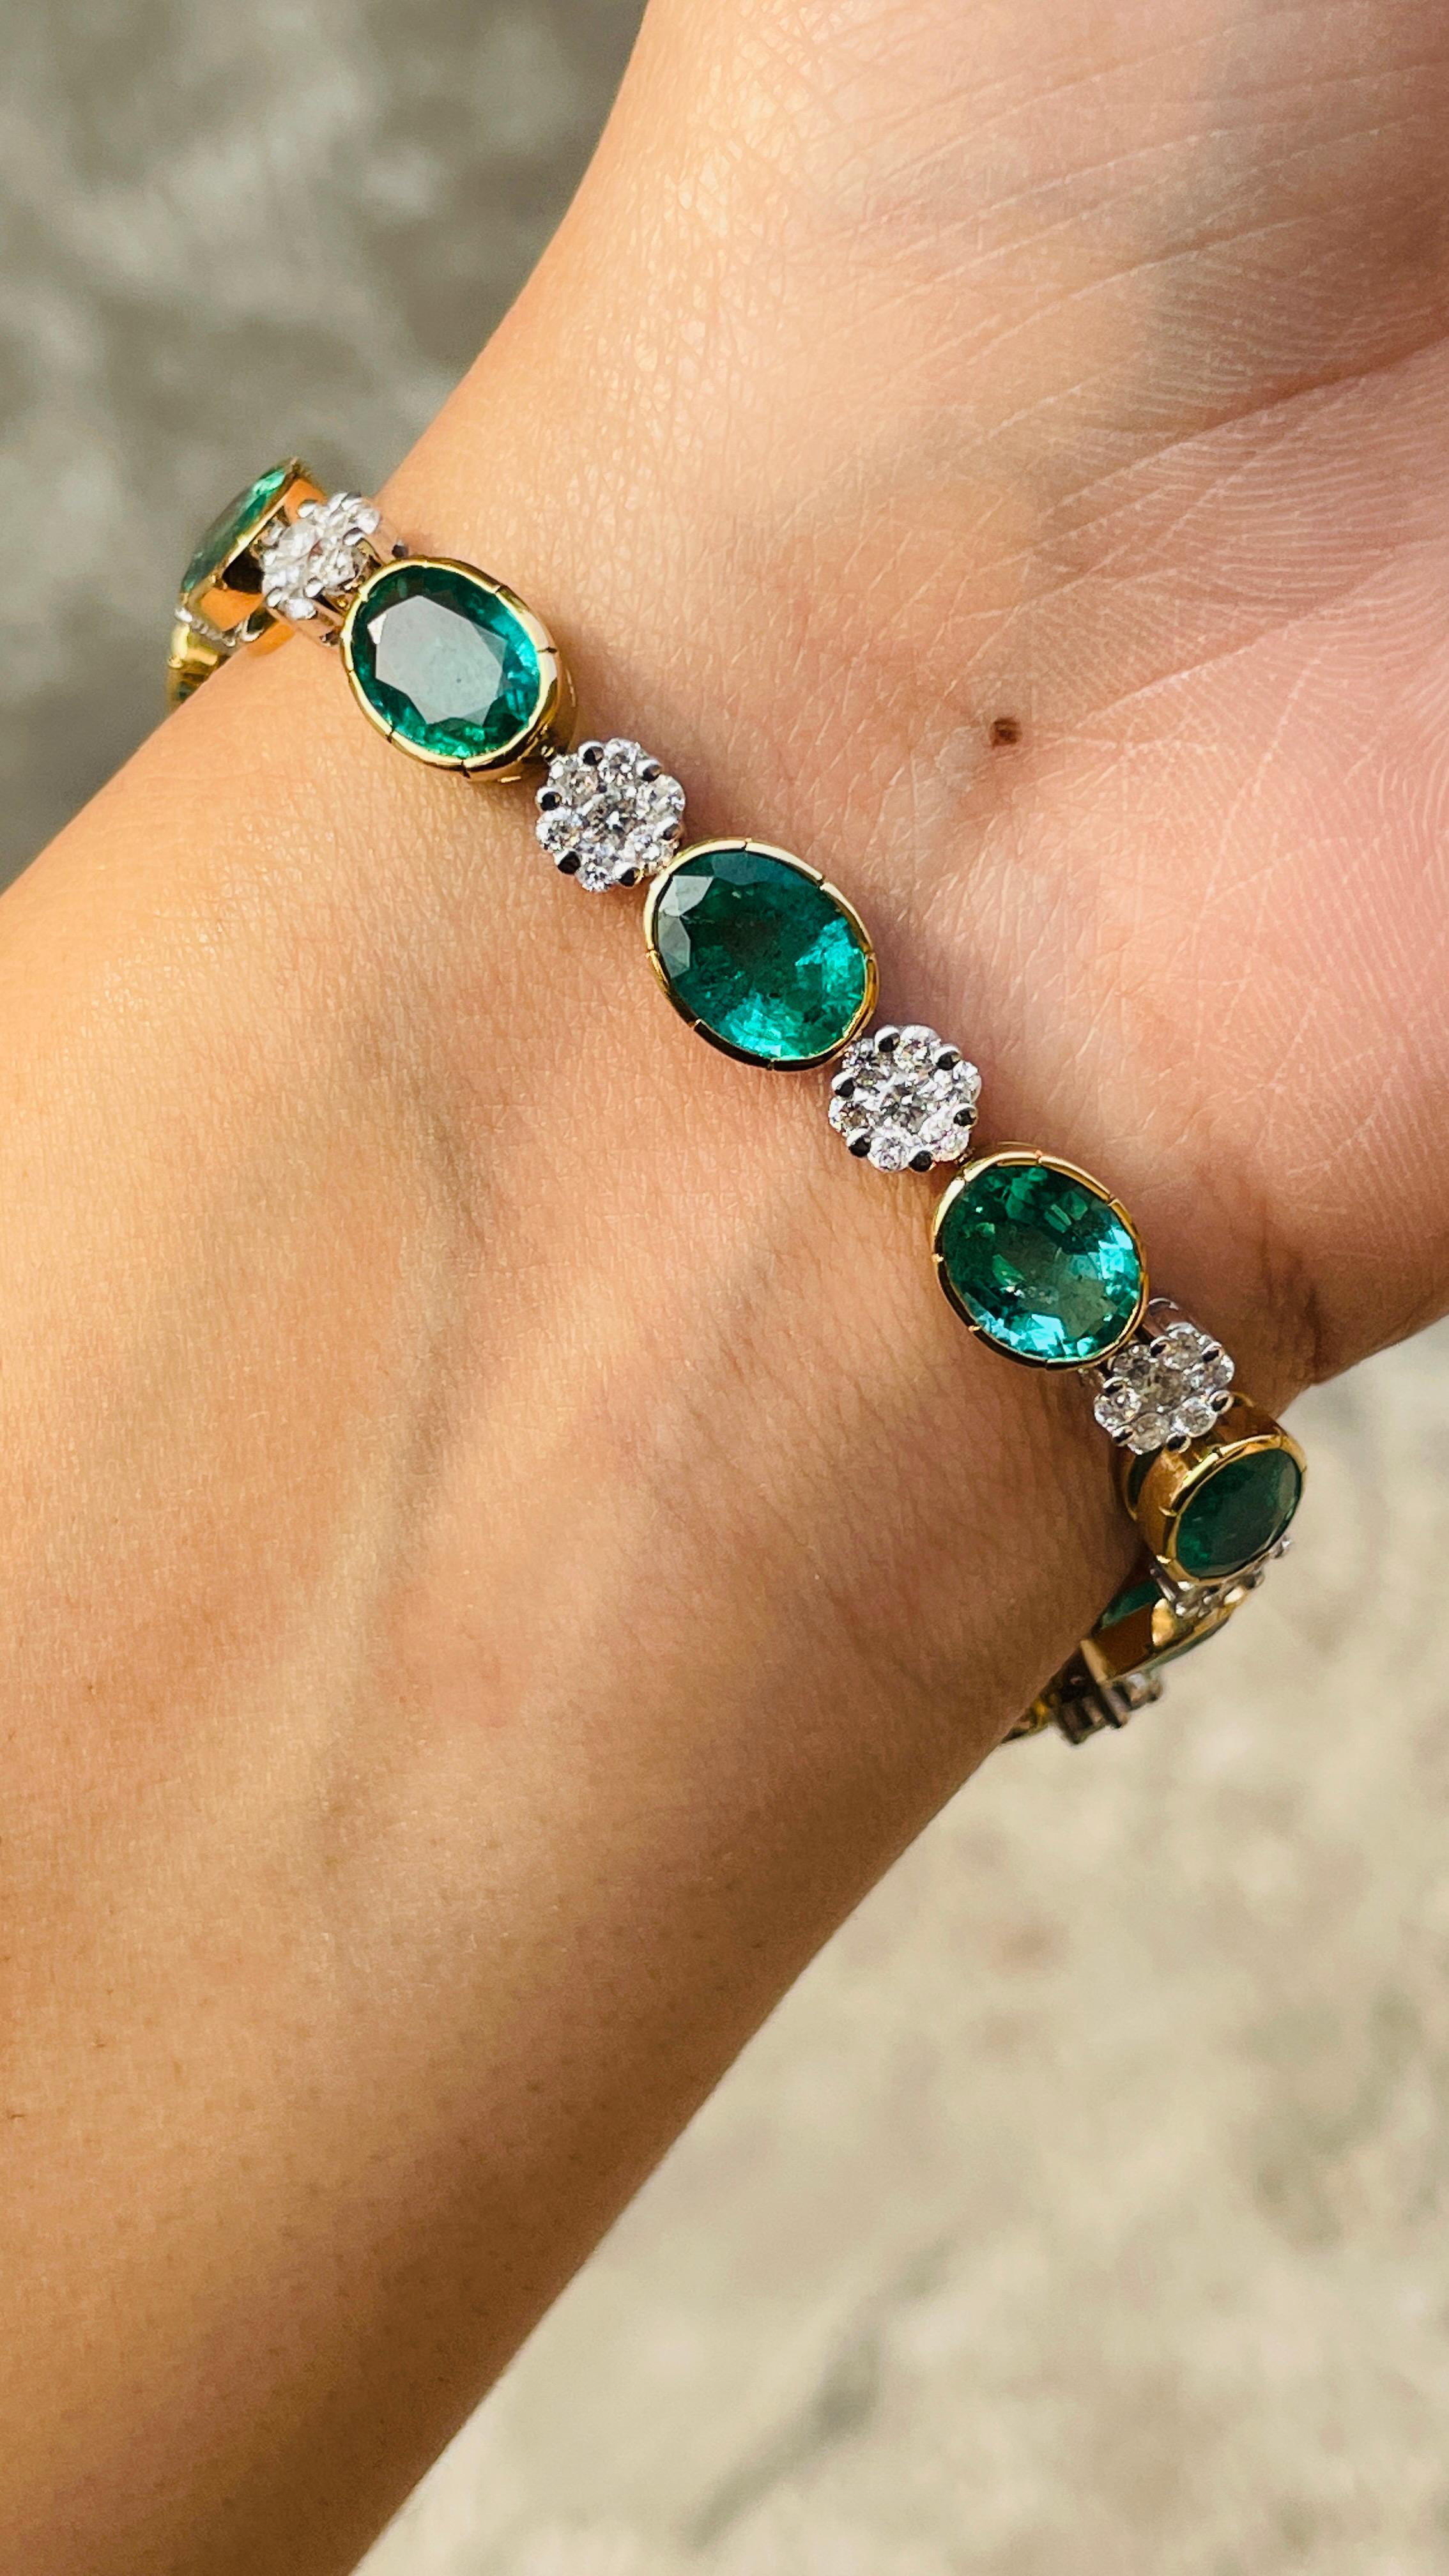 Emerald bracelet in 18K Gold. It has a perfect oval cut gemstone studded with diamonds to make you stand out on any occasion or an event. 
A tennis bracelet is an essential piece of jewelry when it comes to your wedding day. The sleek and elegant